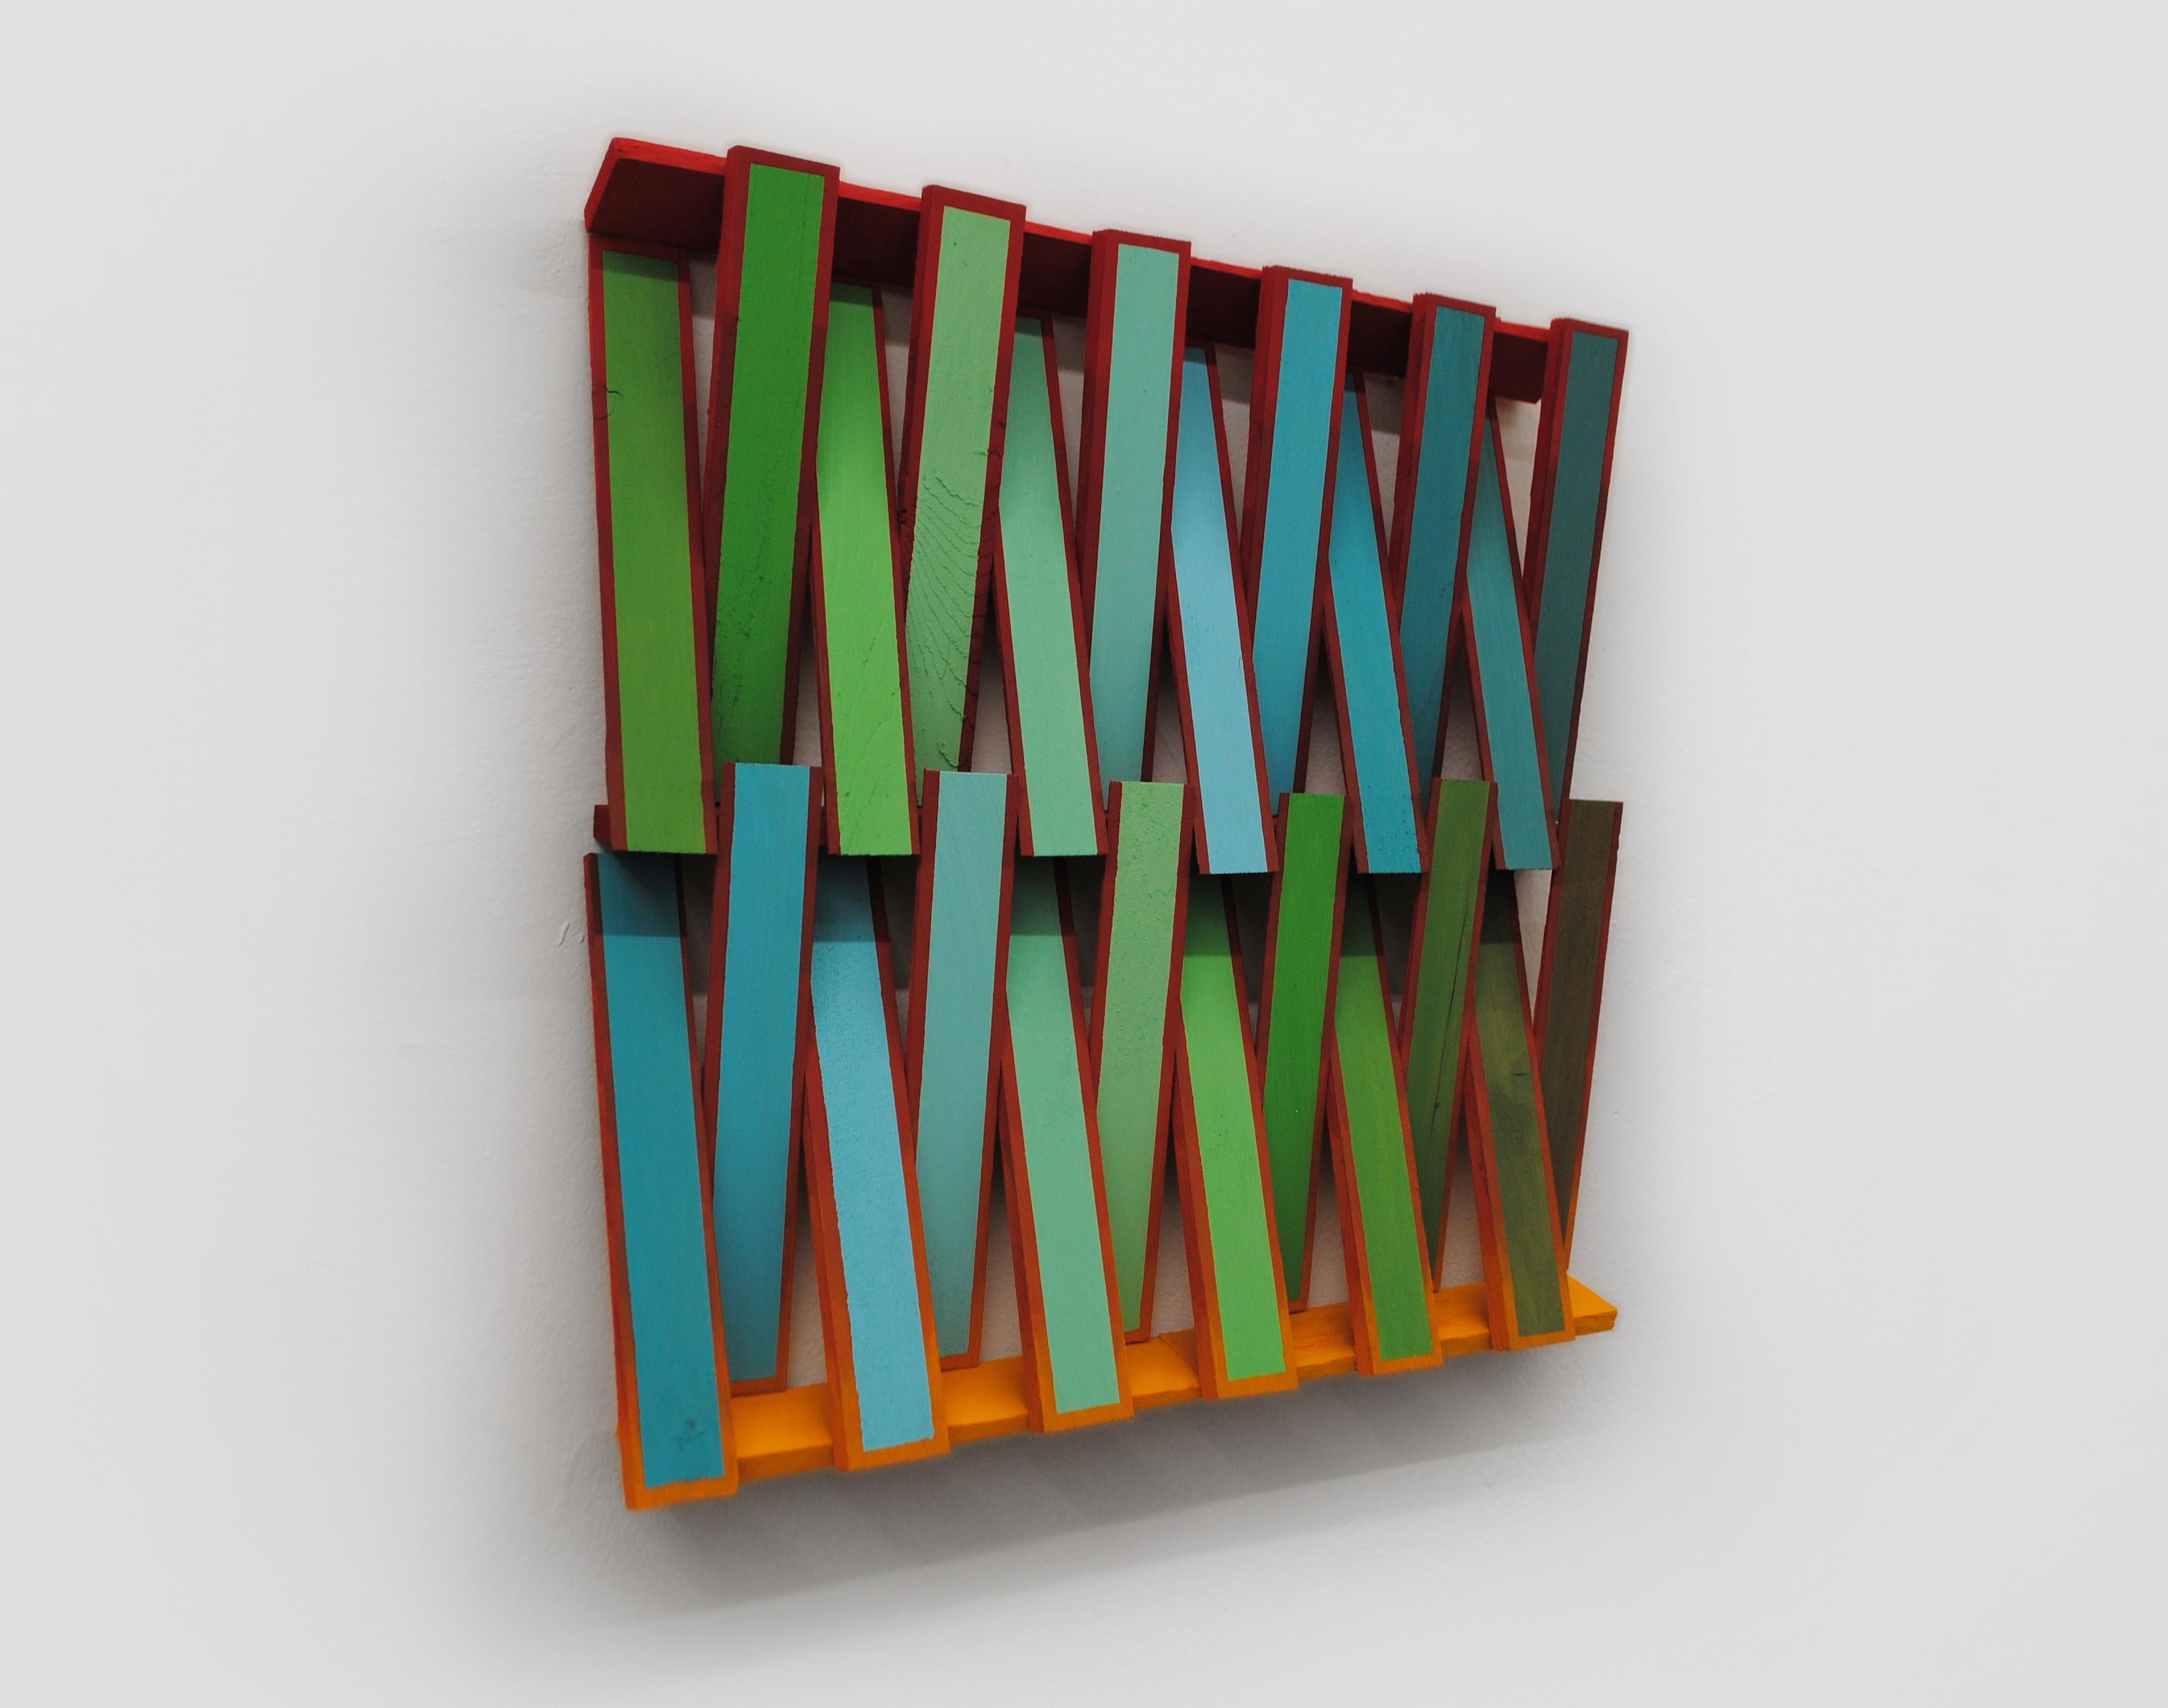 Shim - Contemporary, Dynamic, Abstract Hangable Sculpture, Acrylic on Wood - Mixed Media Art by Kayla Rumpp